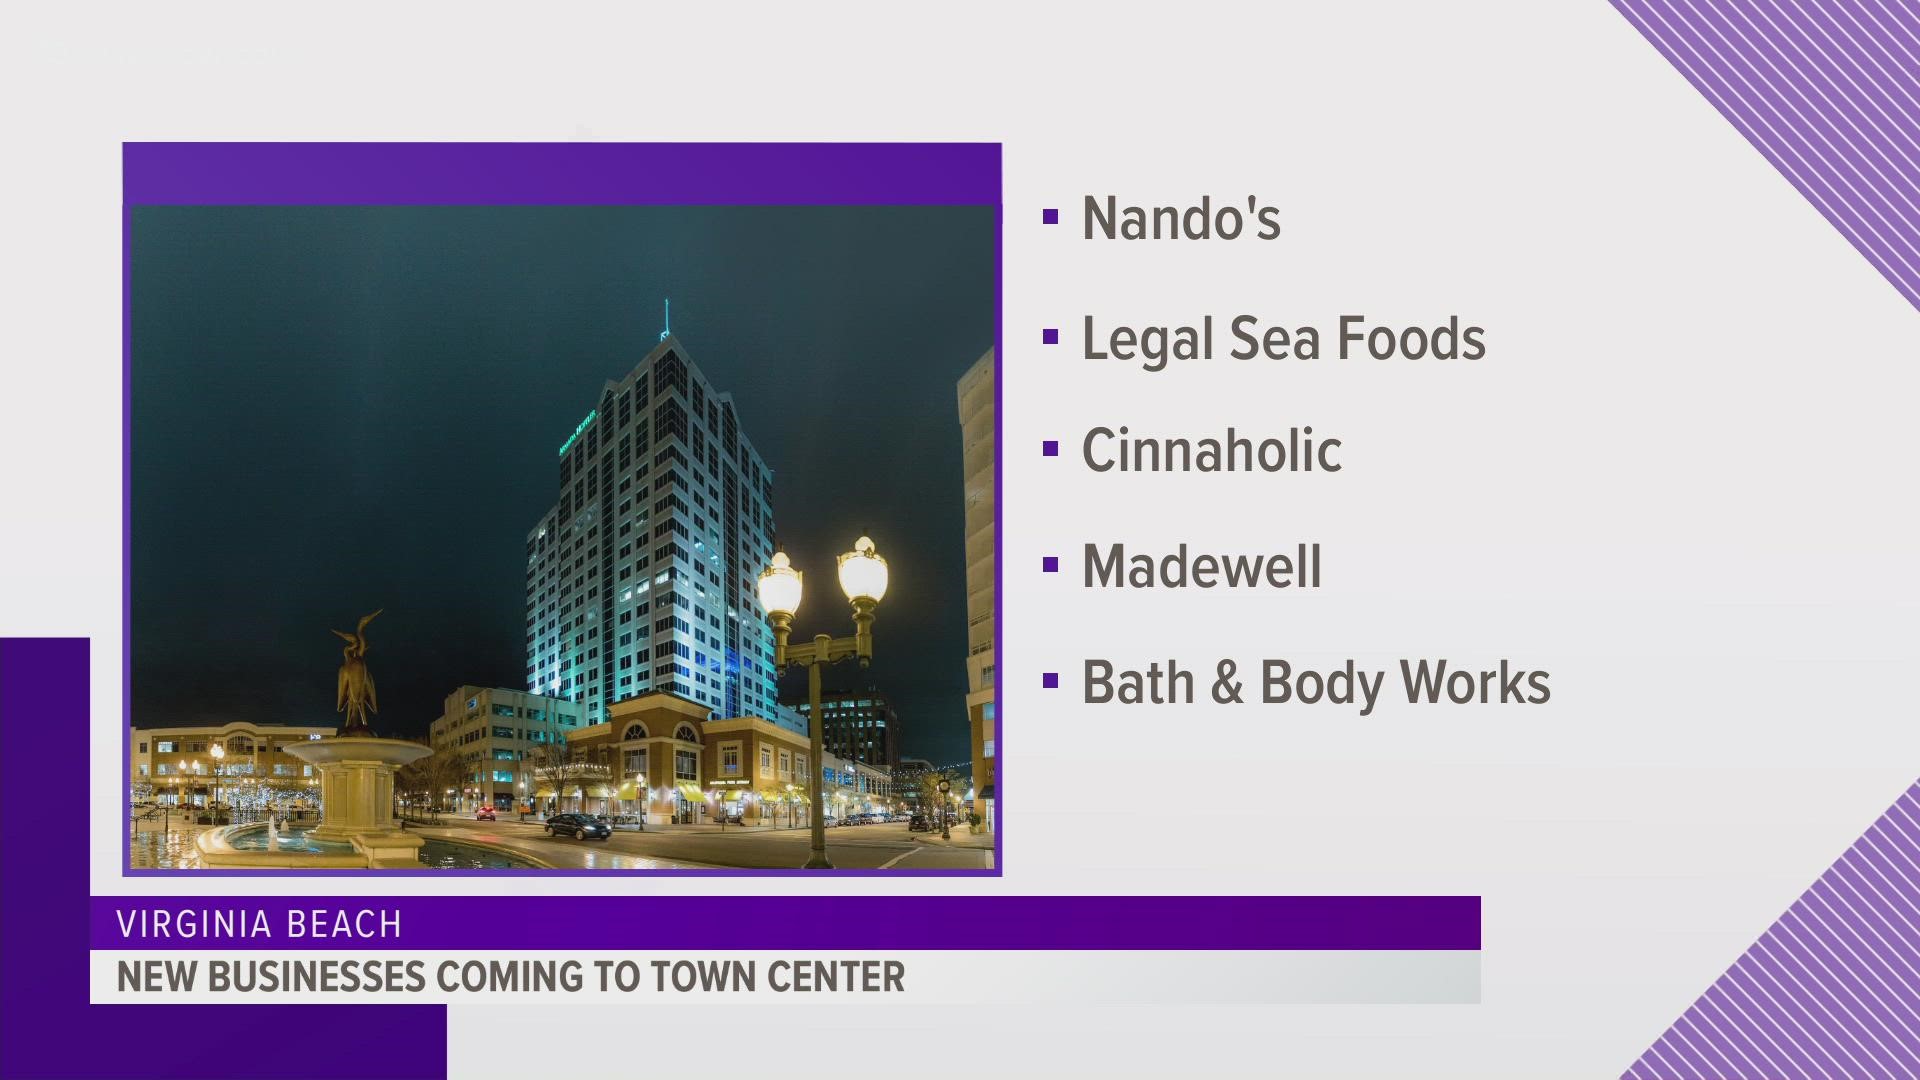 There's no word yet on the addresses that these businesses will move into. Armada Hoffler Properties didn't give a set timeline for their openings, either.